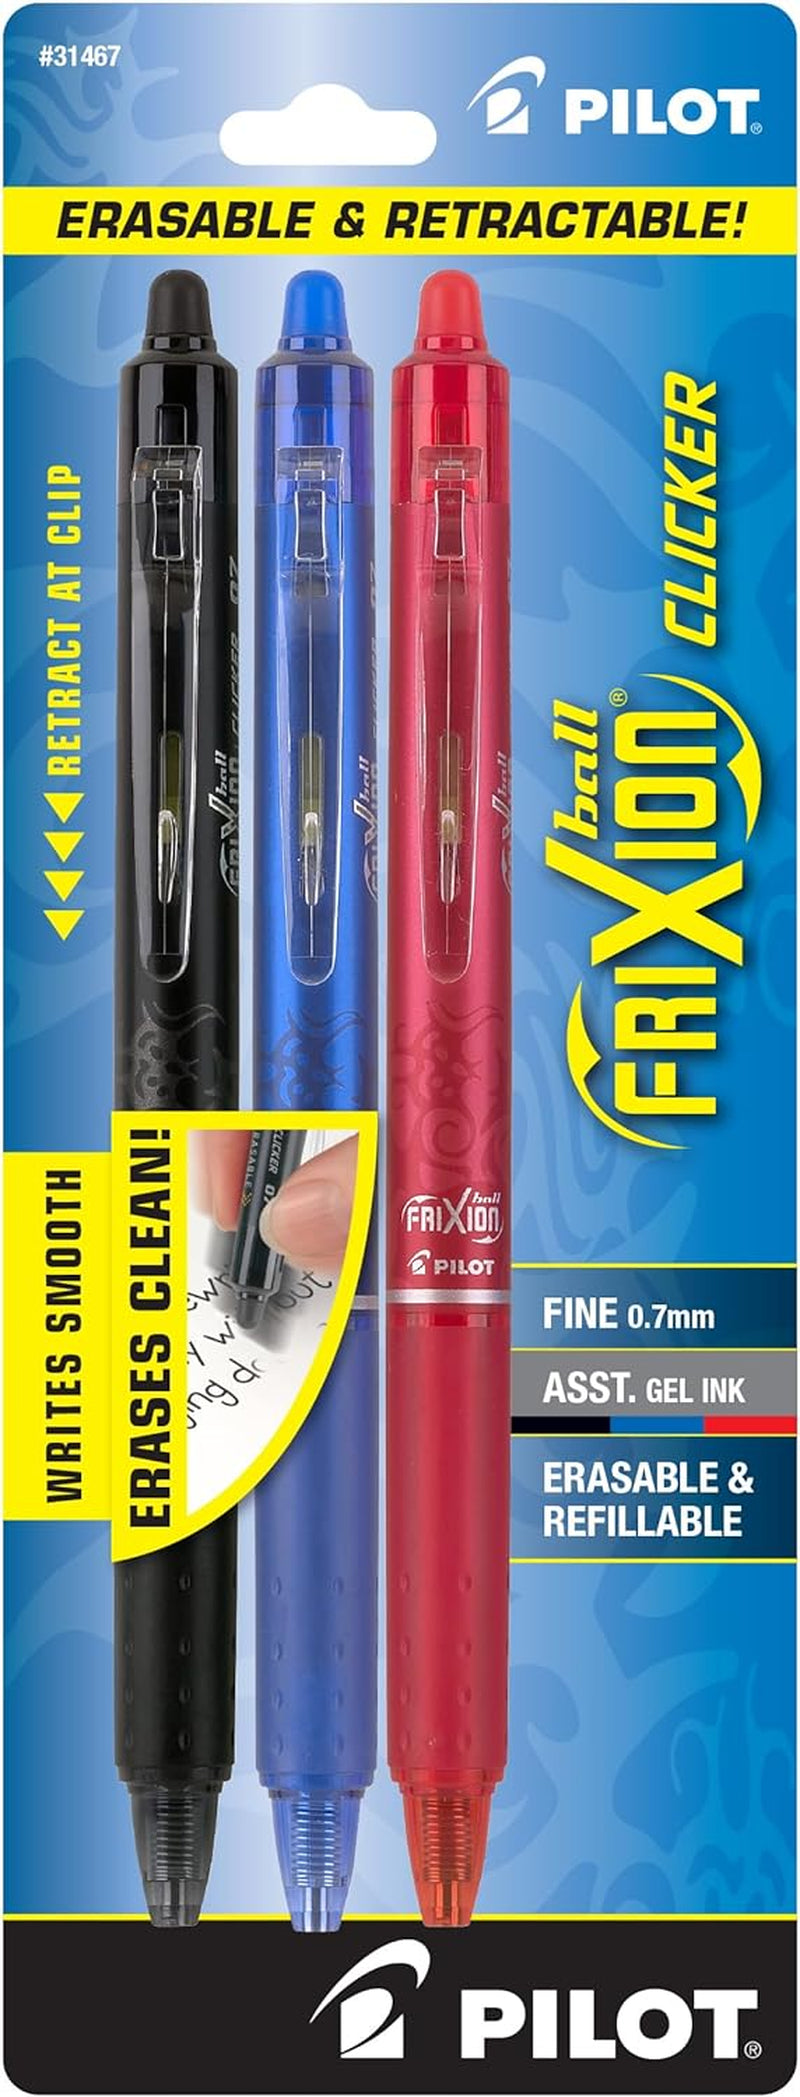 Frixion Clicker Erasable, Refillable & Retractable Gel Ink Pens, Fine Point, Black/Blue/Red Inks, 3-Pack (31467)